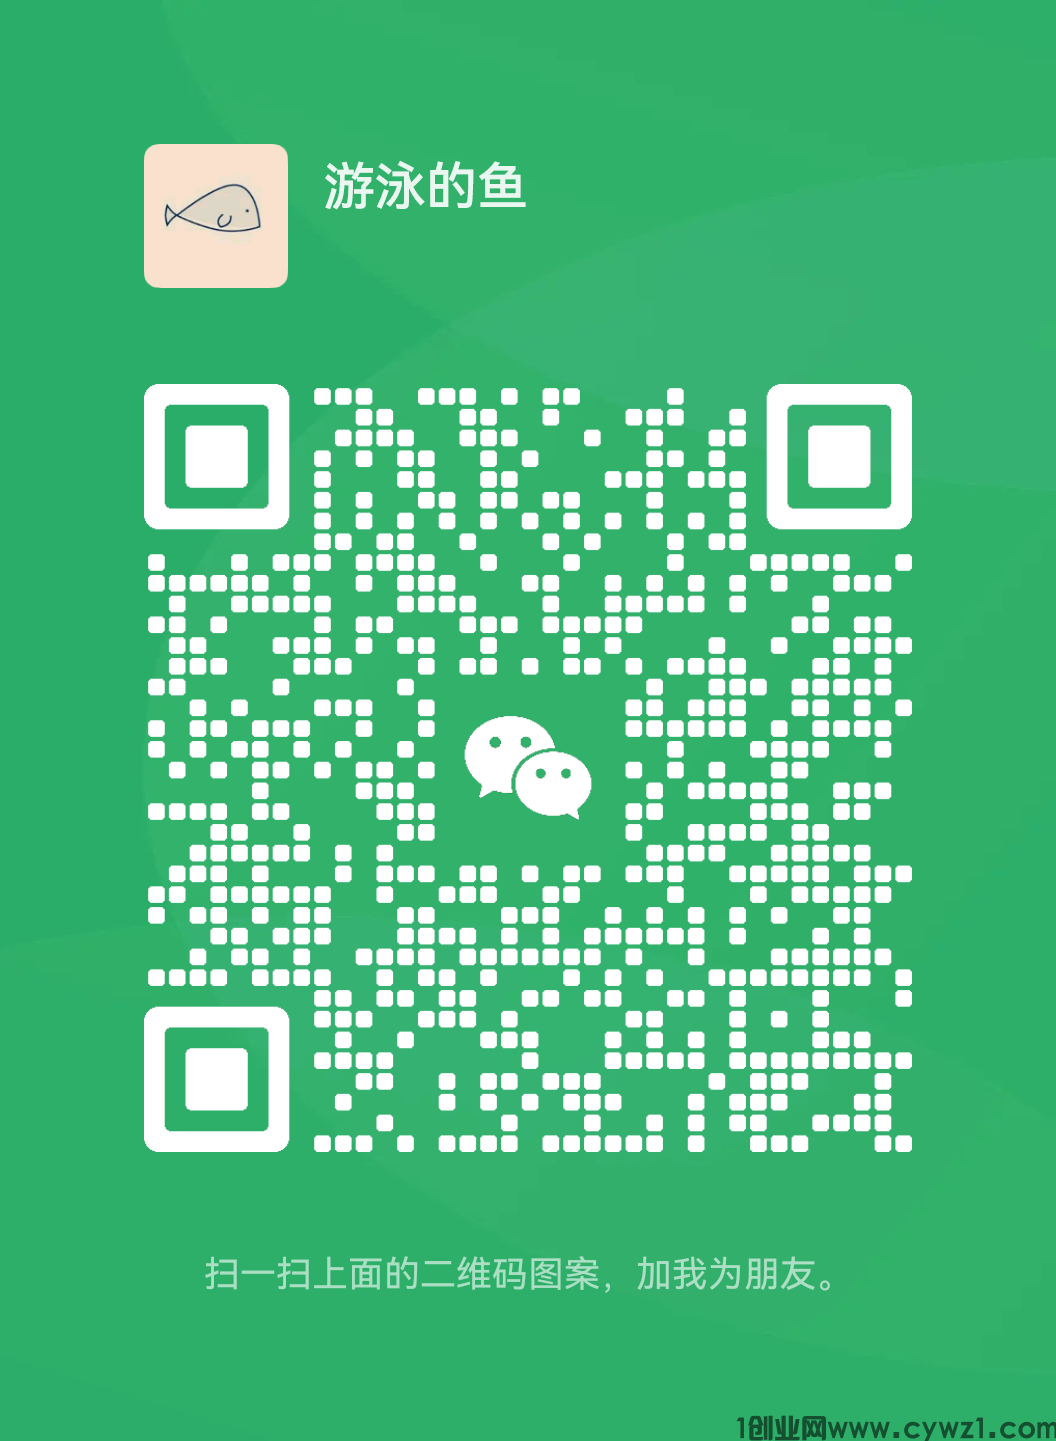 mmqrcode1717976036700.png